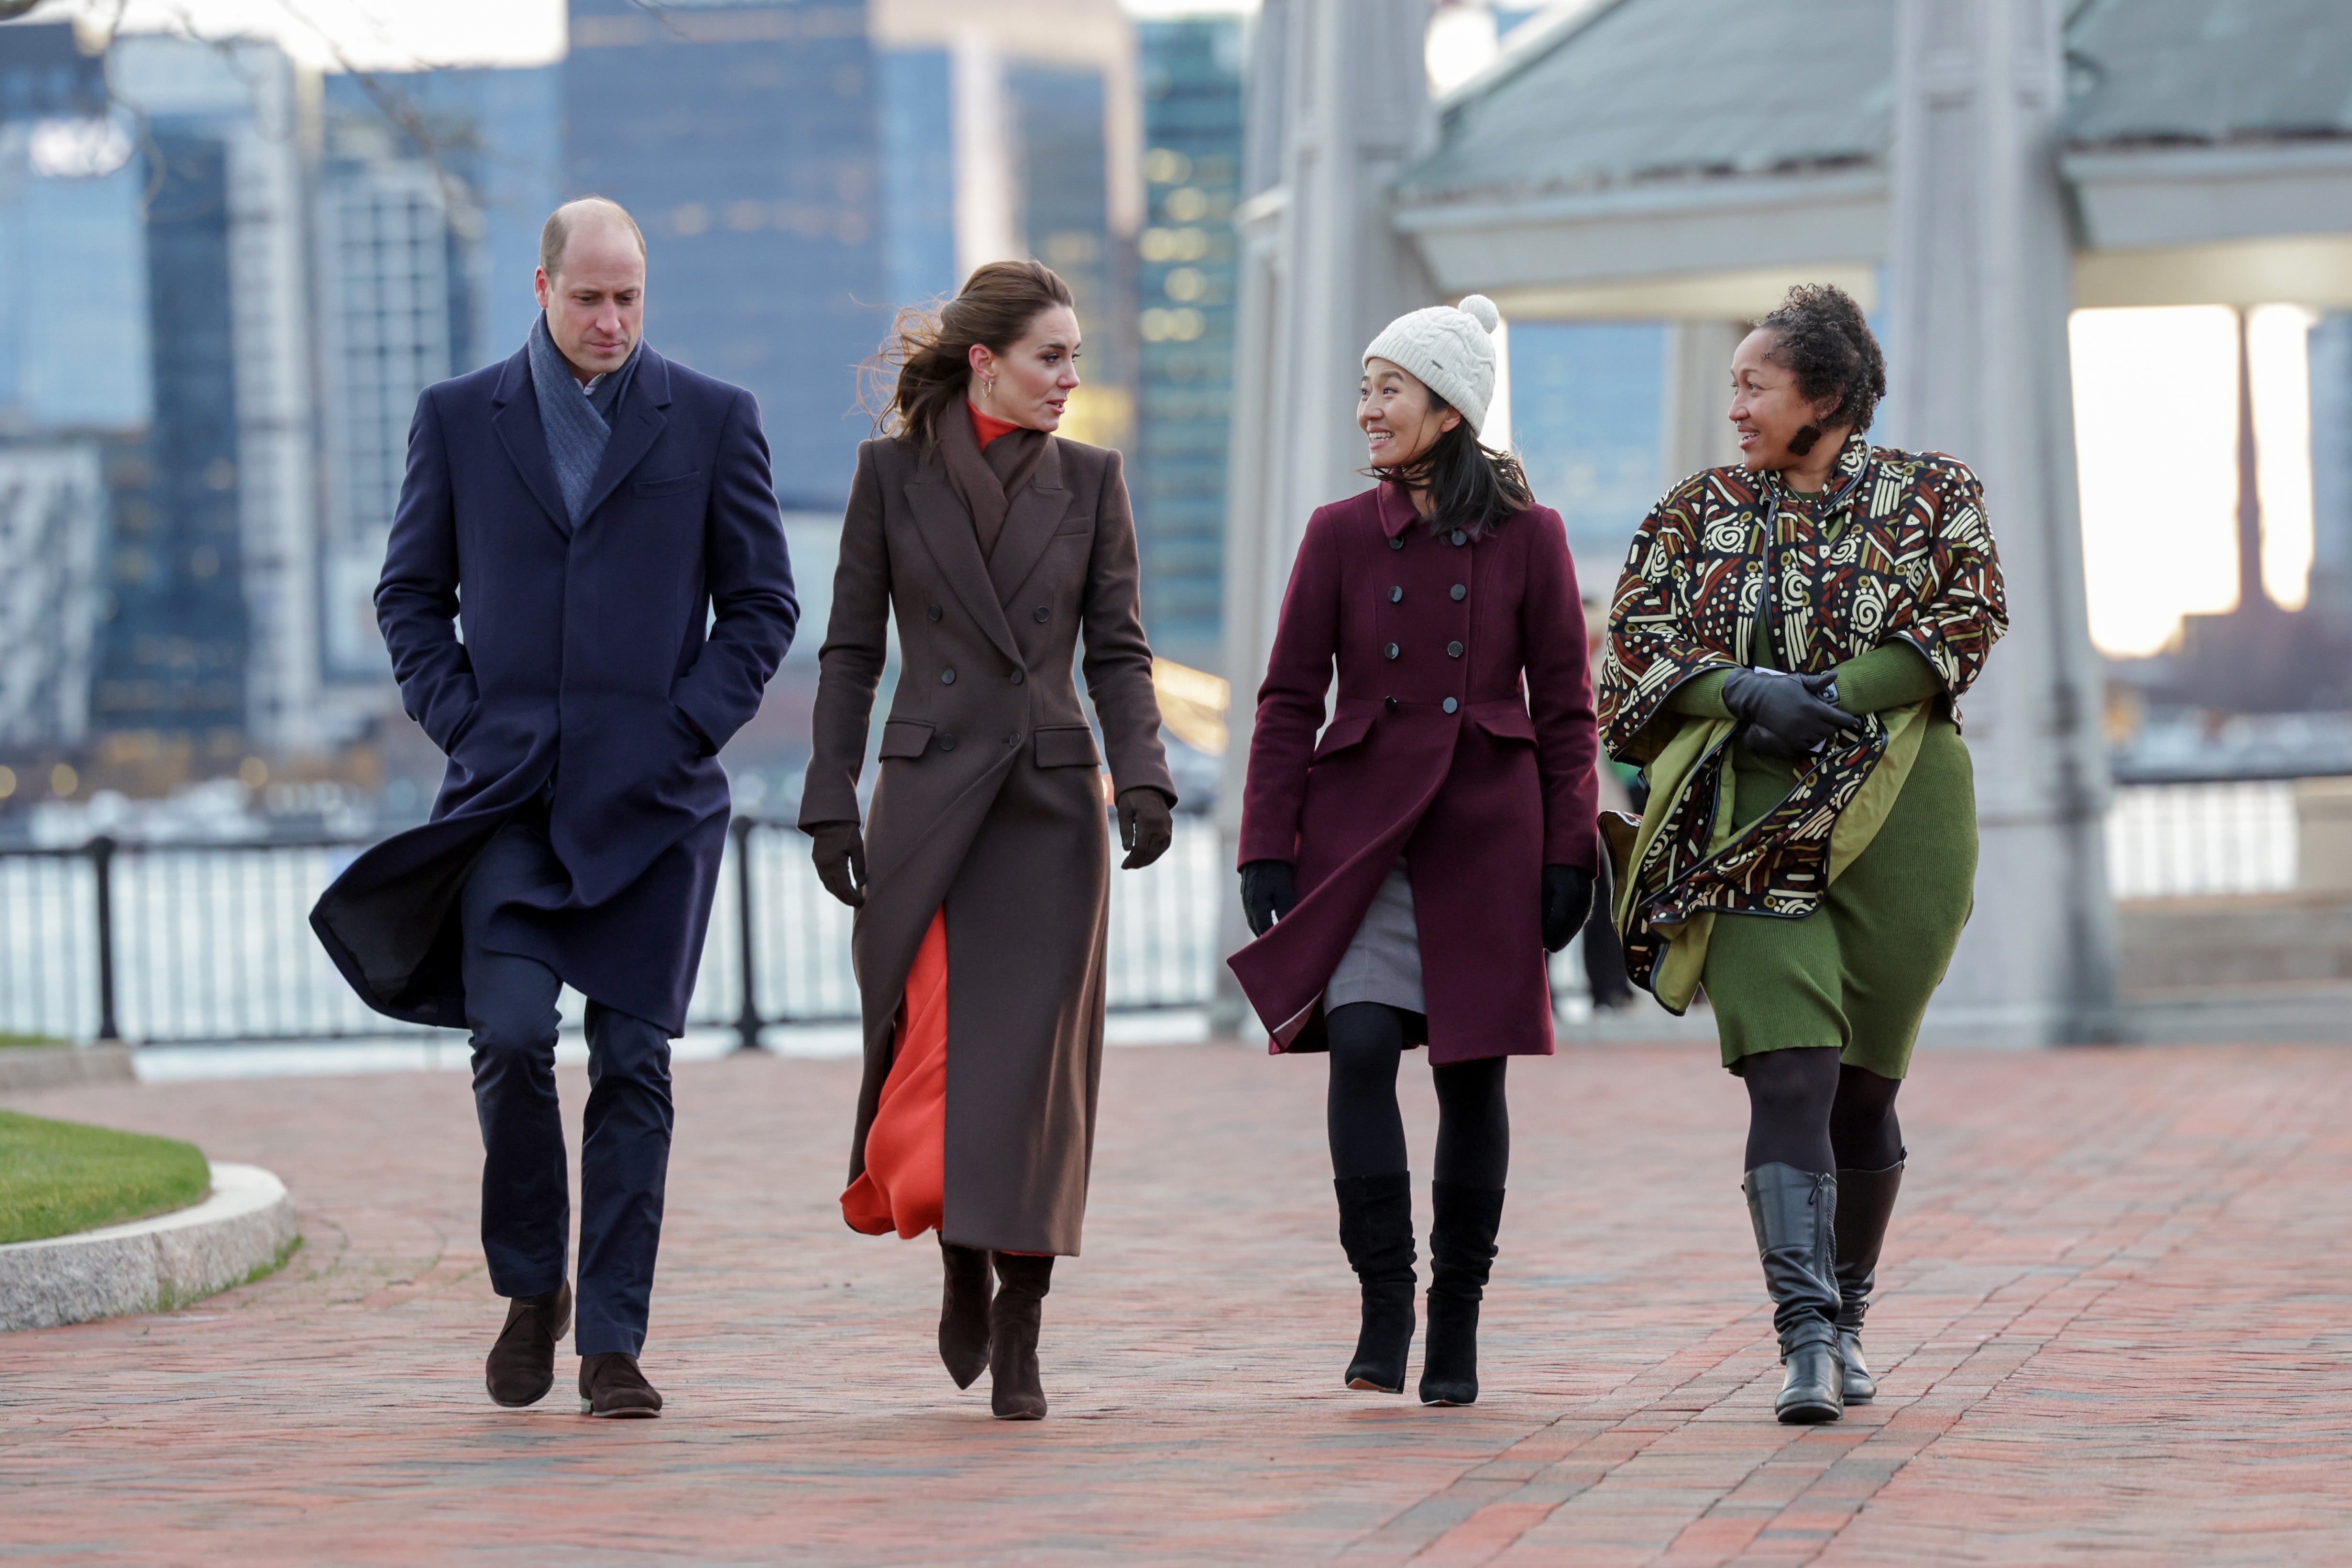 Prince William, Prince of Wales and Catherine, Princess of Wales speak with Mayor Michelle Wu and Reverend Mariama White-Hammond as they visit east Boston to see the changing face of Boston's shoreline